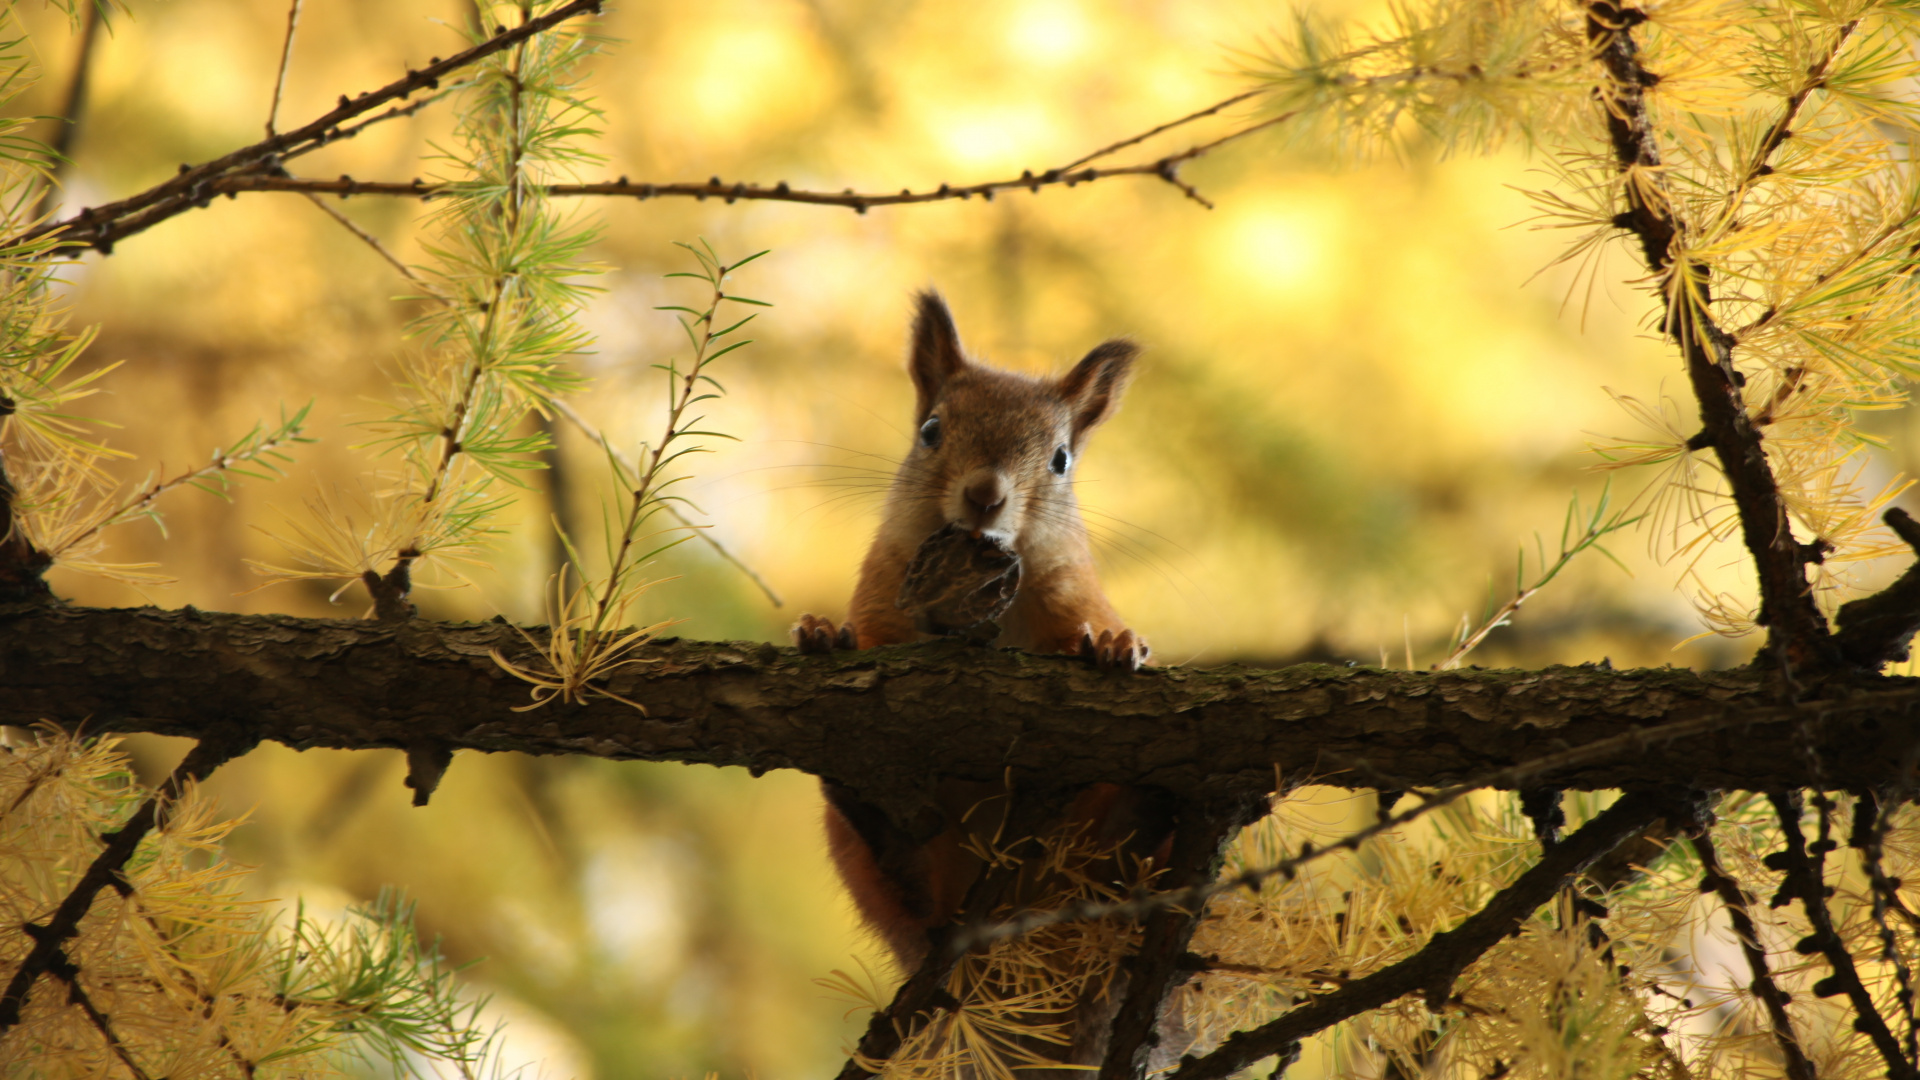 Brown Fox on Brown Tree Branch During Daytime. Wallpaper in 1920x1080 Resolution